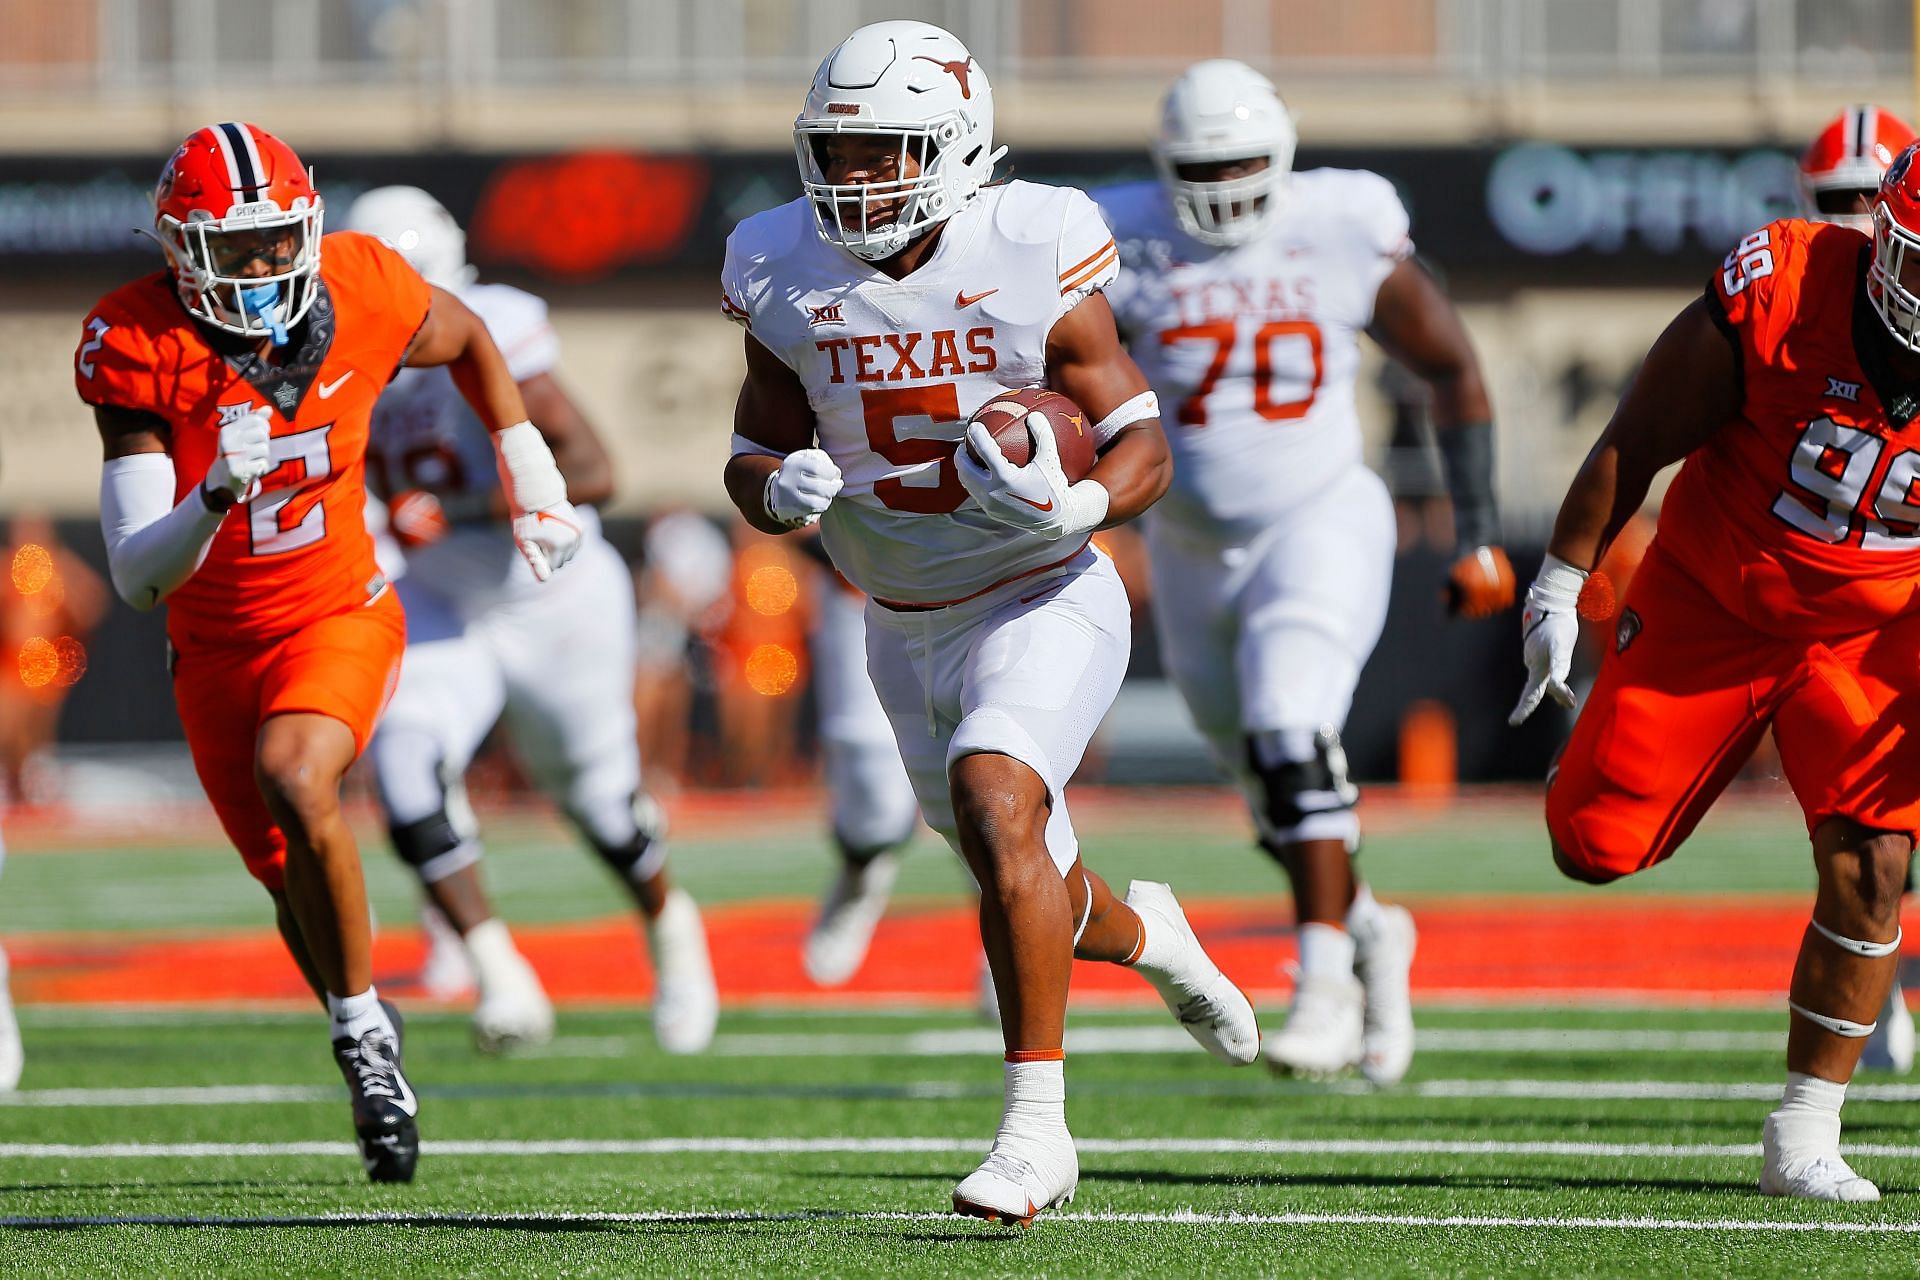 Oklahoma State vs Texas football rivalry history H2H, records, and more